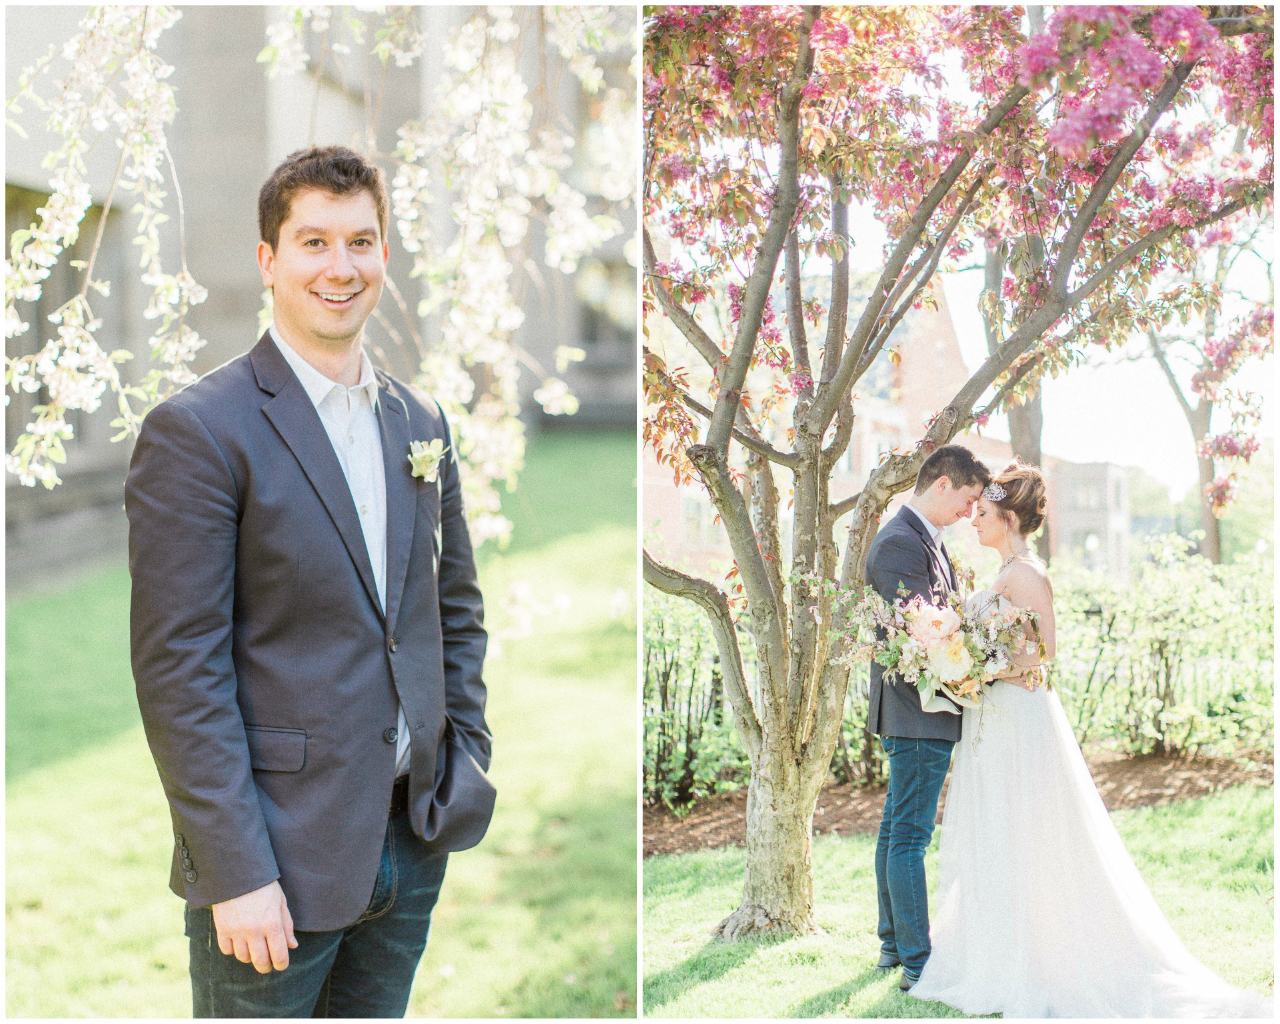 Cinderella Inspired Proposal | The Day's Design | Samantha James Photography